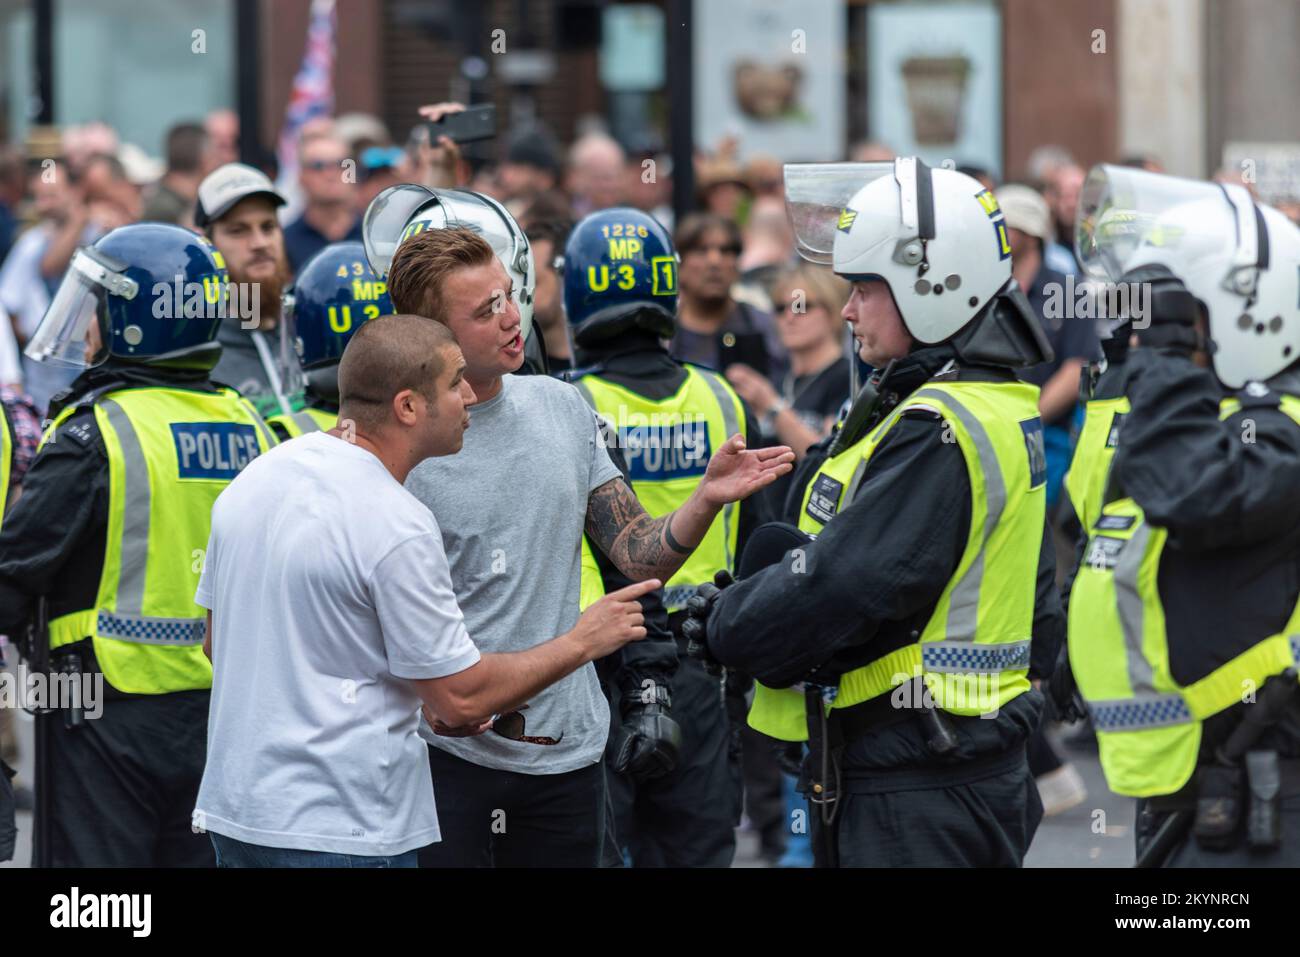 Supporters of Tommy Robinson, such as the EDL, protested in London demonstrating for his release after arrest. Protester with police officer Stock Photo